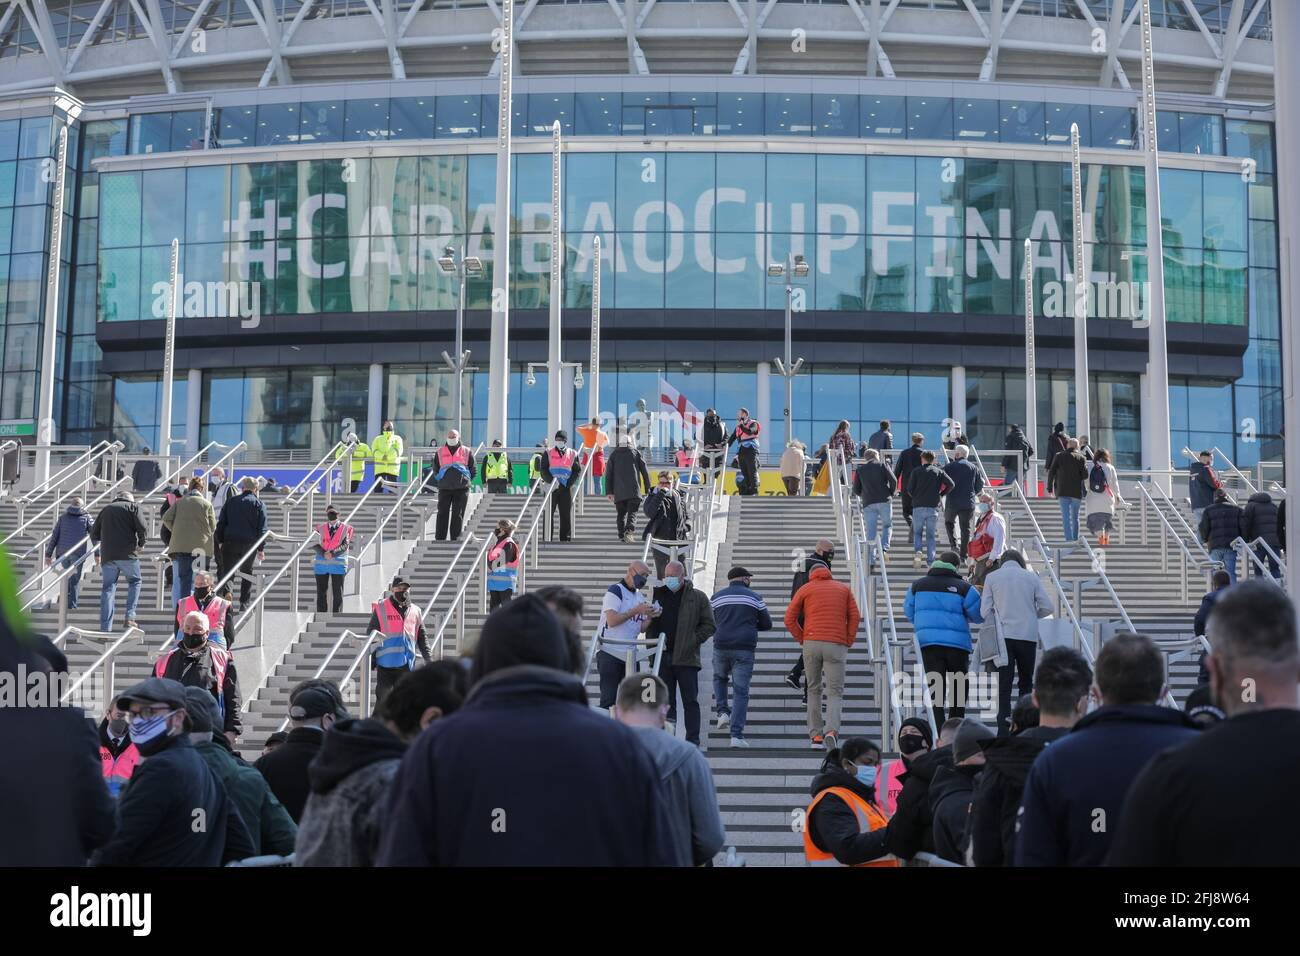 Wembley Stadium, Wembley Park, UK. 25th April 2021.Spectators on the Olympic Steps outside Wembley Stadium ahead of the Carabao Cup Final match between Manchester City and Tottenham Hoptspur.  8,000 local residents, NHS Staff and fans are expected to attend the match, the largest number of spectators attending a sporting event in a UK stadium for over a year.  Covid-19 Lateral Flow testing will take before and after the match and data gathered will be used to plan how all events can take place following lockdown. Amanda Rose/Alamy Live News Stock Photo